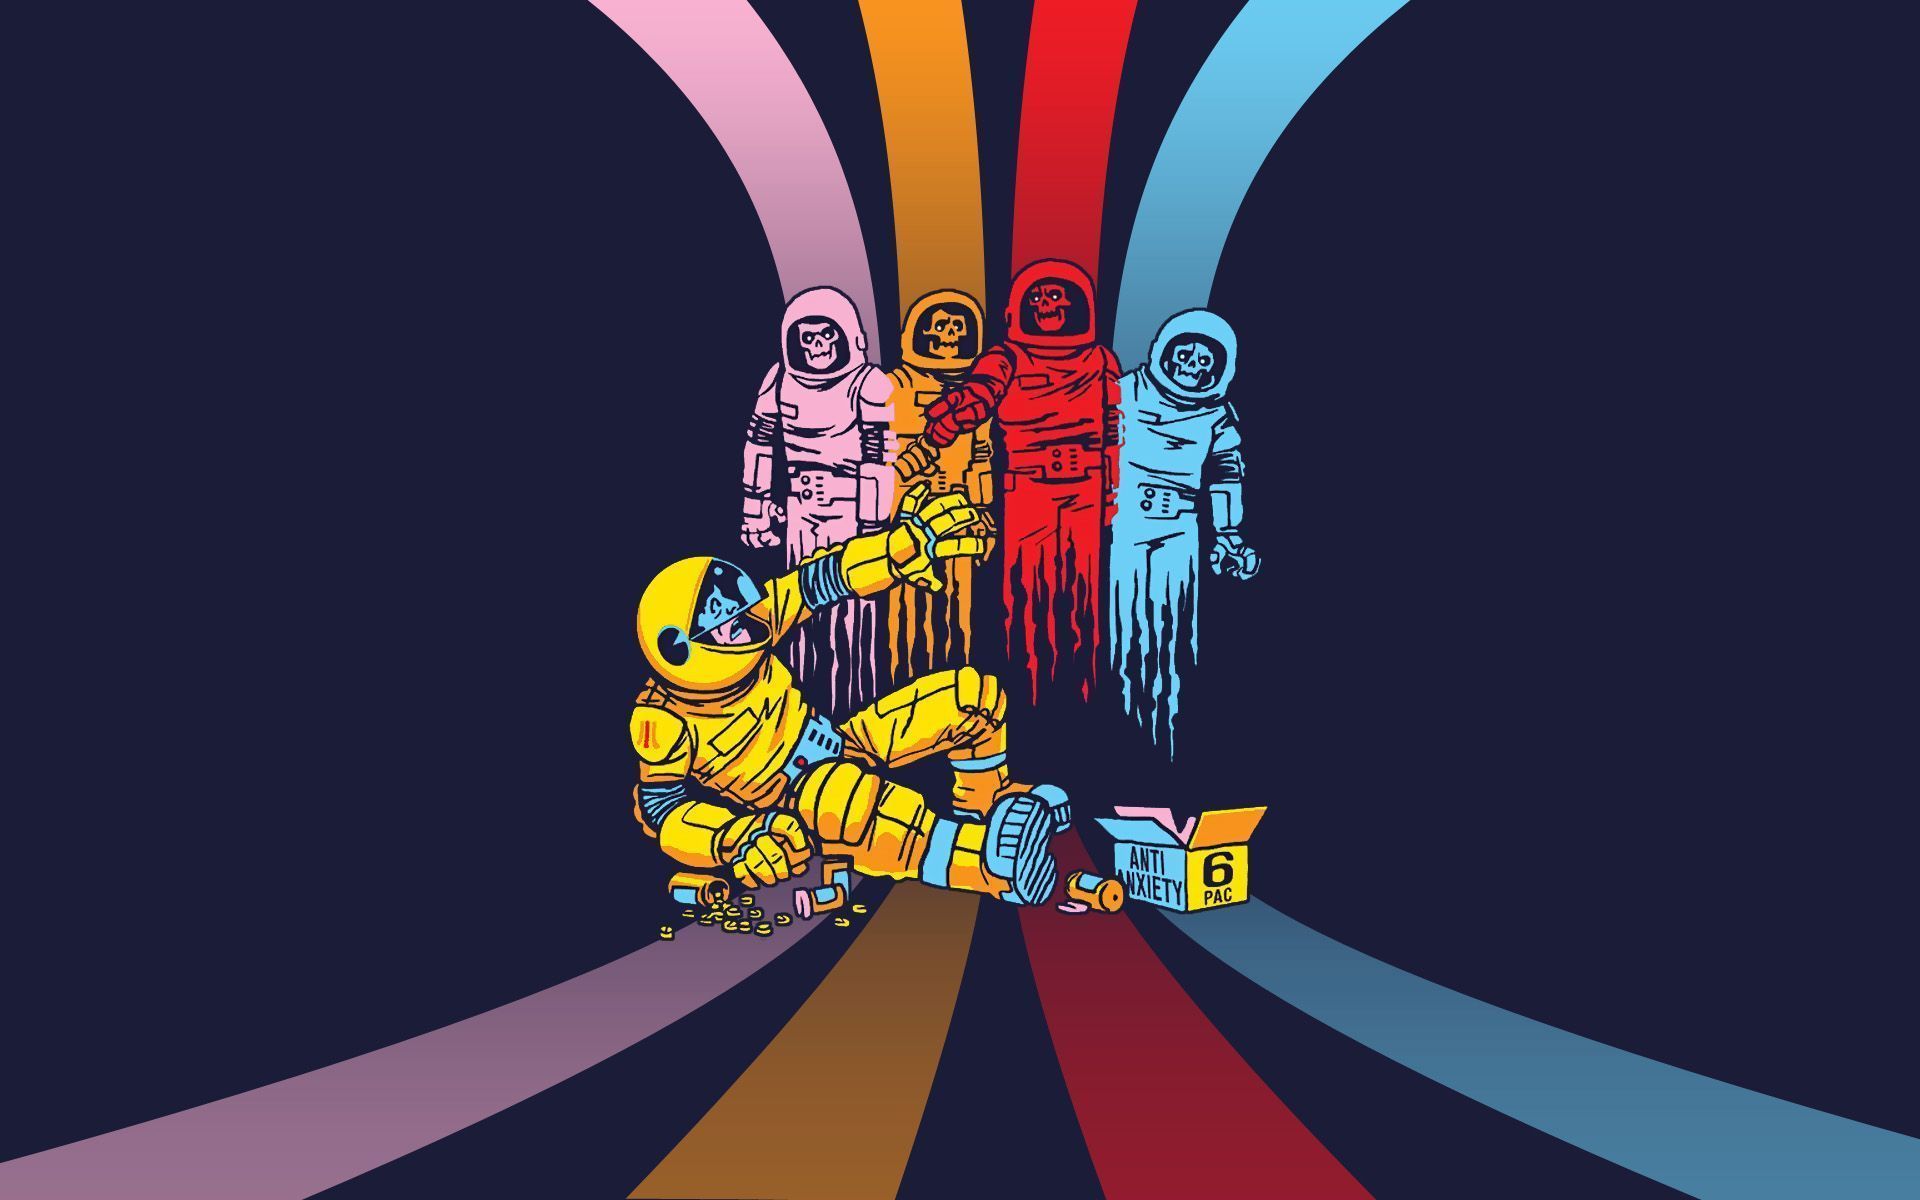 Weekly Wallpaper featuring Pac-Man in SPACE | PGM